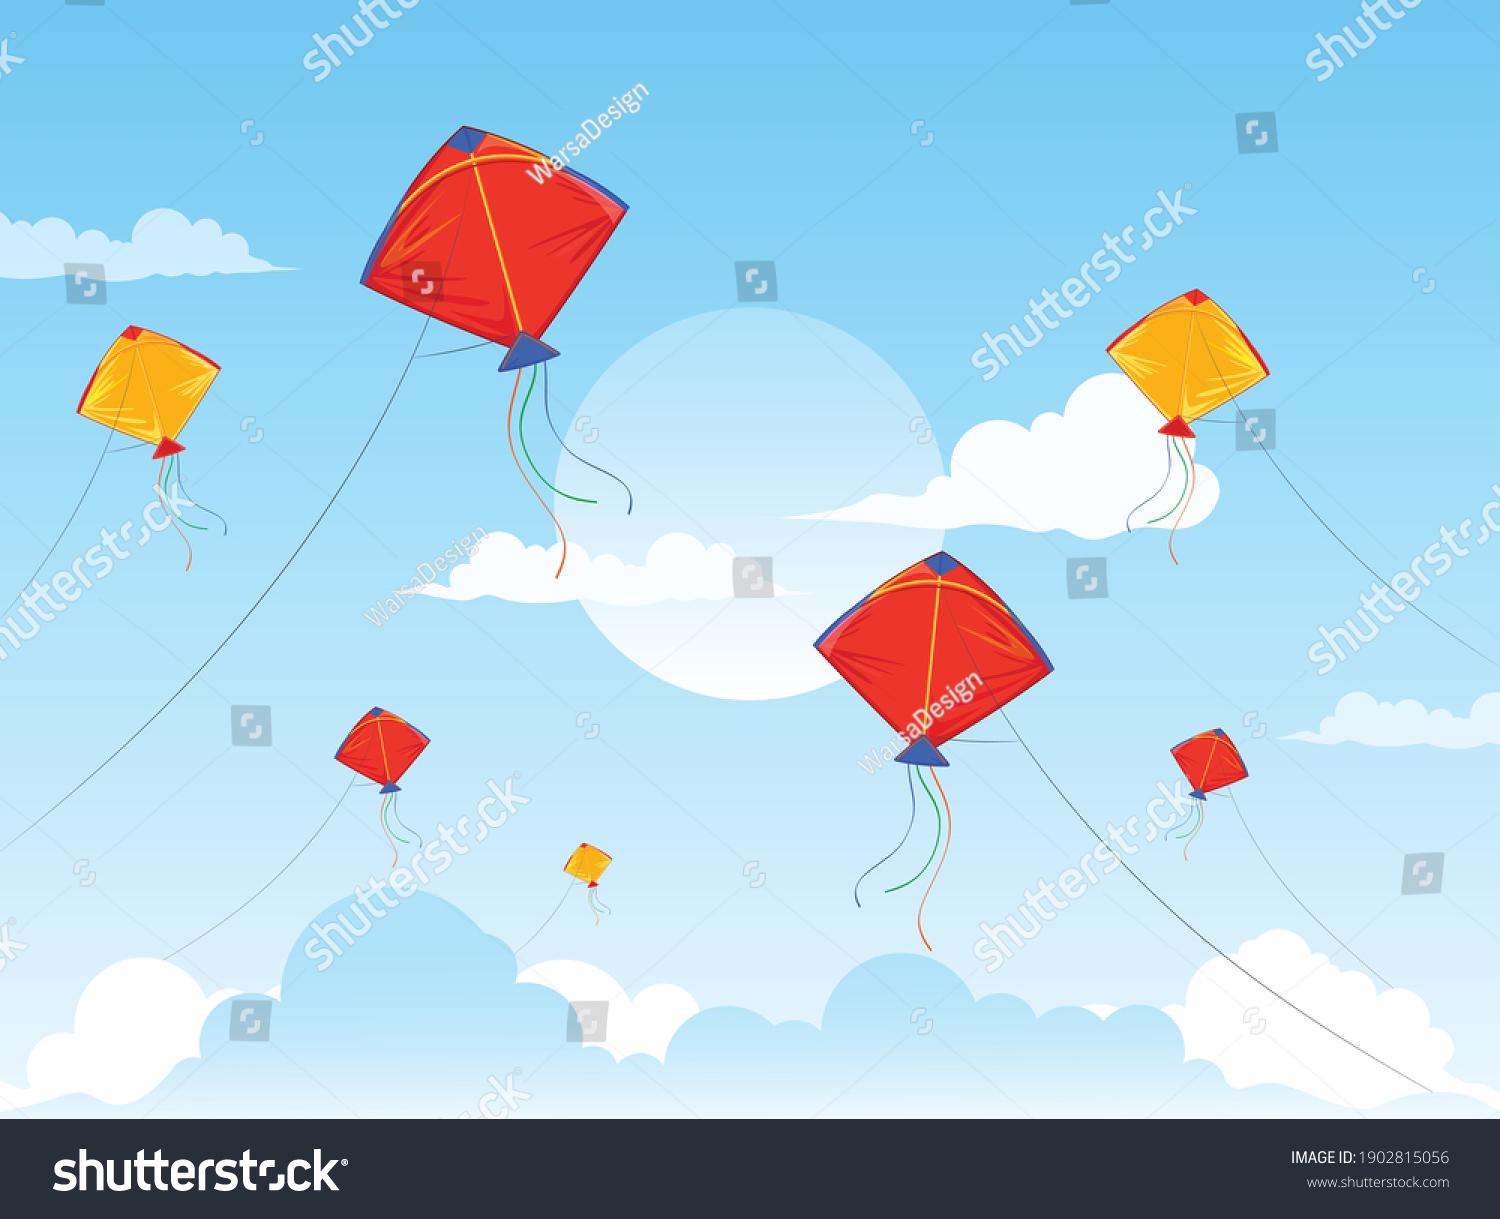 SVG of Colorful kites flying in the clouds. Colored kites and clouds in the bright blue sky illustration. svg